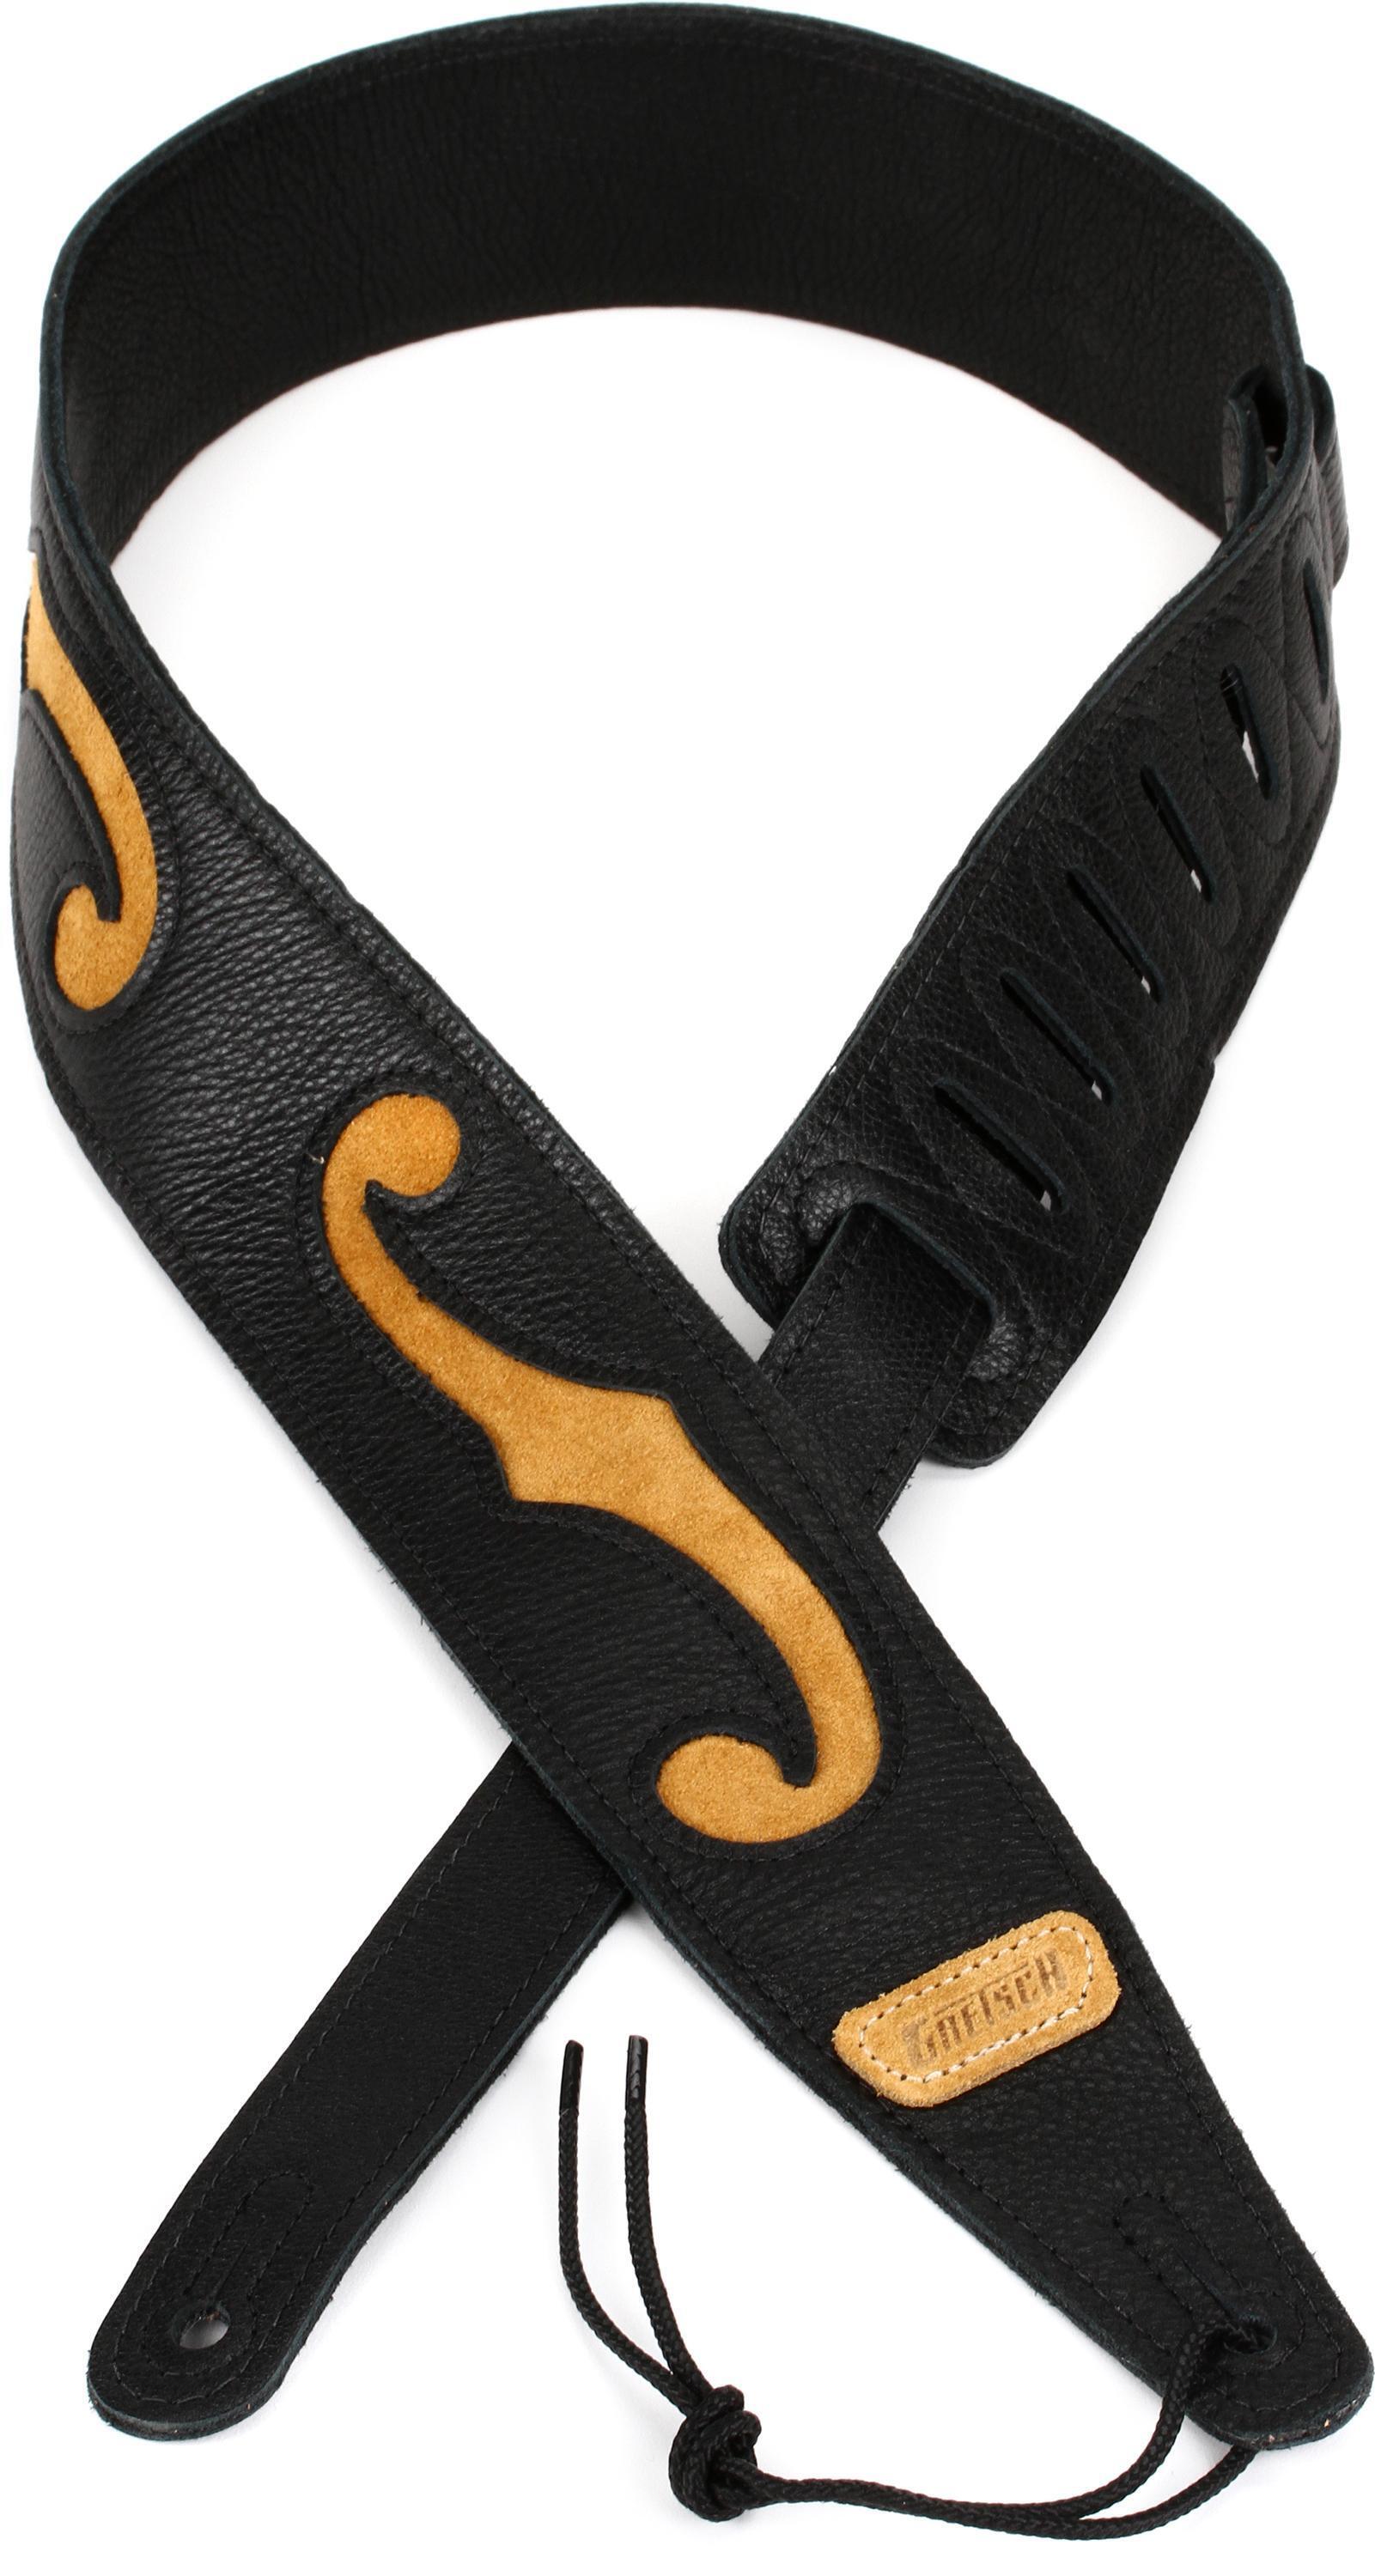 Gretsch F-Holes Leather Strap - Black and Tan